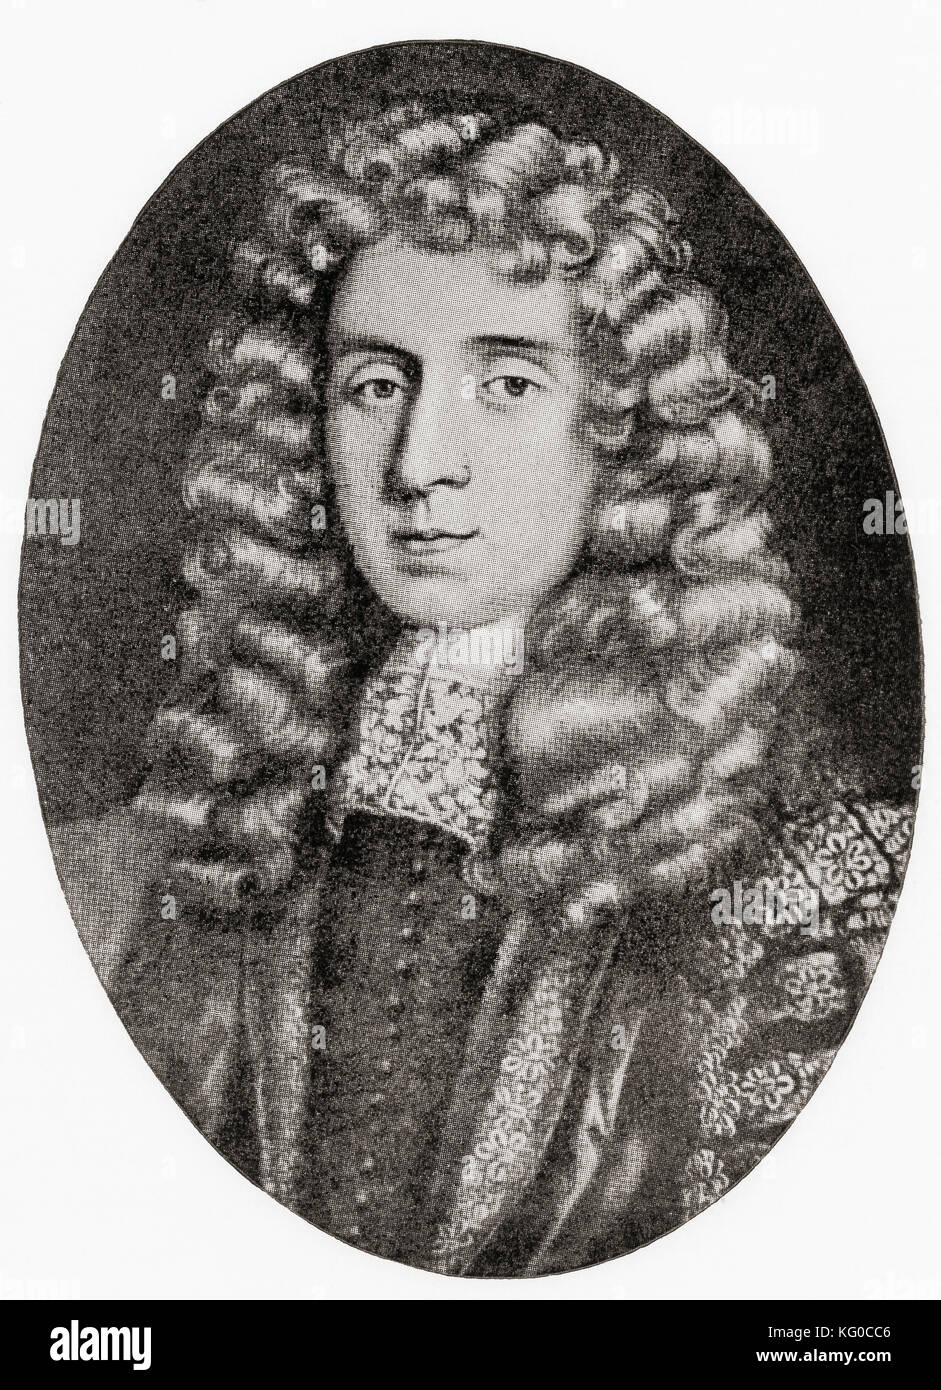 George Jeffreys, 1st Baron Jeffreys of Wem, 1645 –  1689, aka "The Hanging Judge".  Welsh judge and Lord Chancellor.  From Hutchinson's History of the Nations, published 1915. Stock Photo